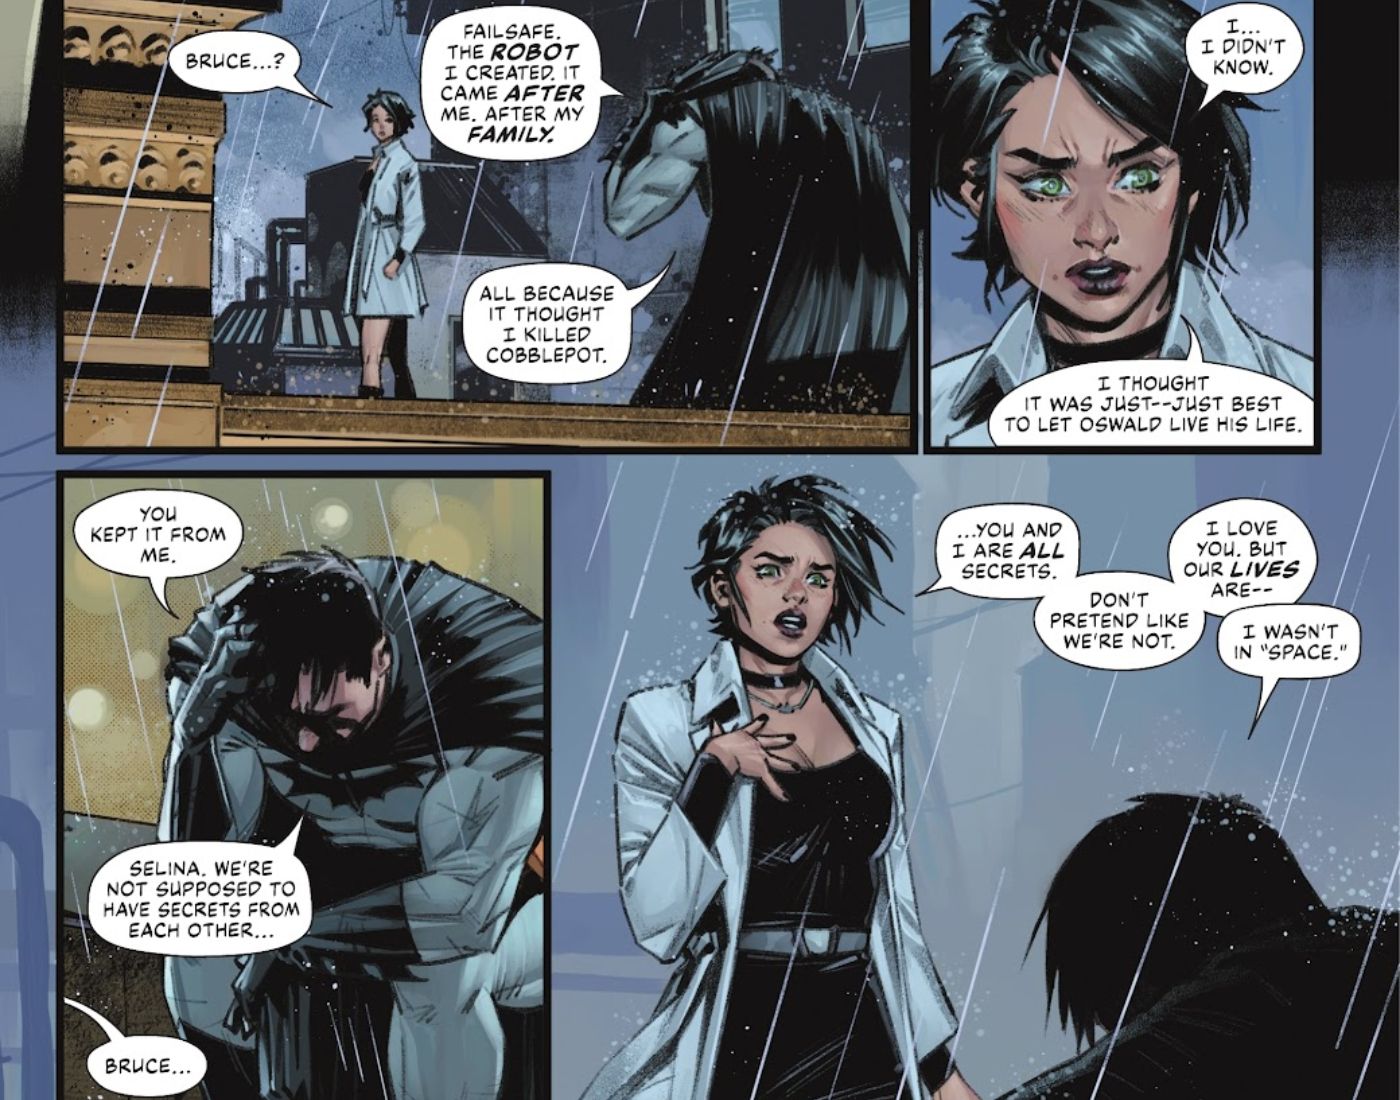 Selina Kyle defends herself and calls out Batman.